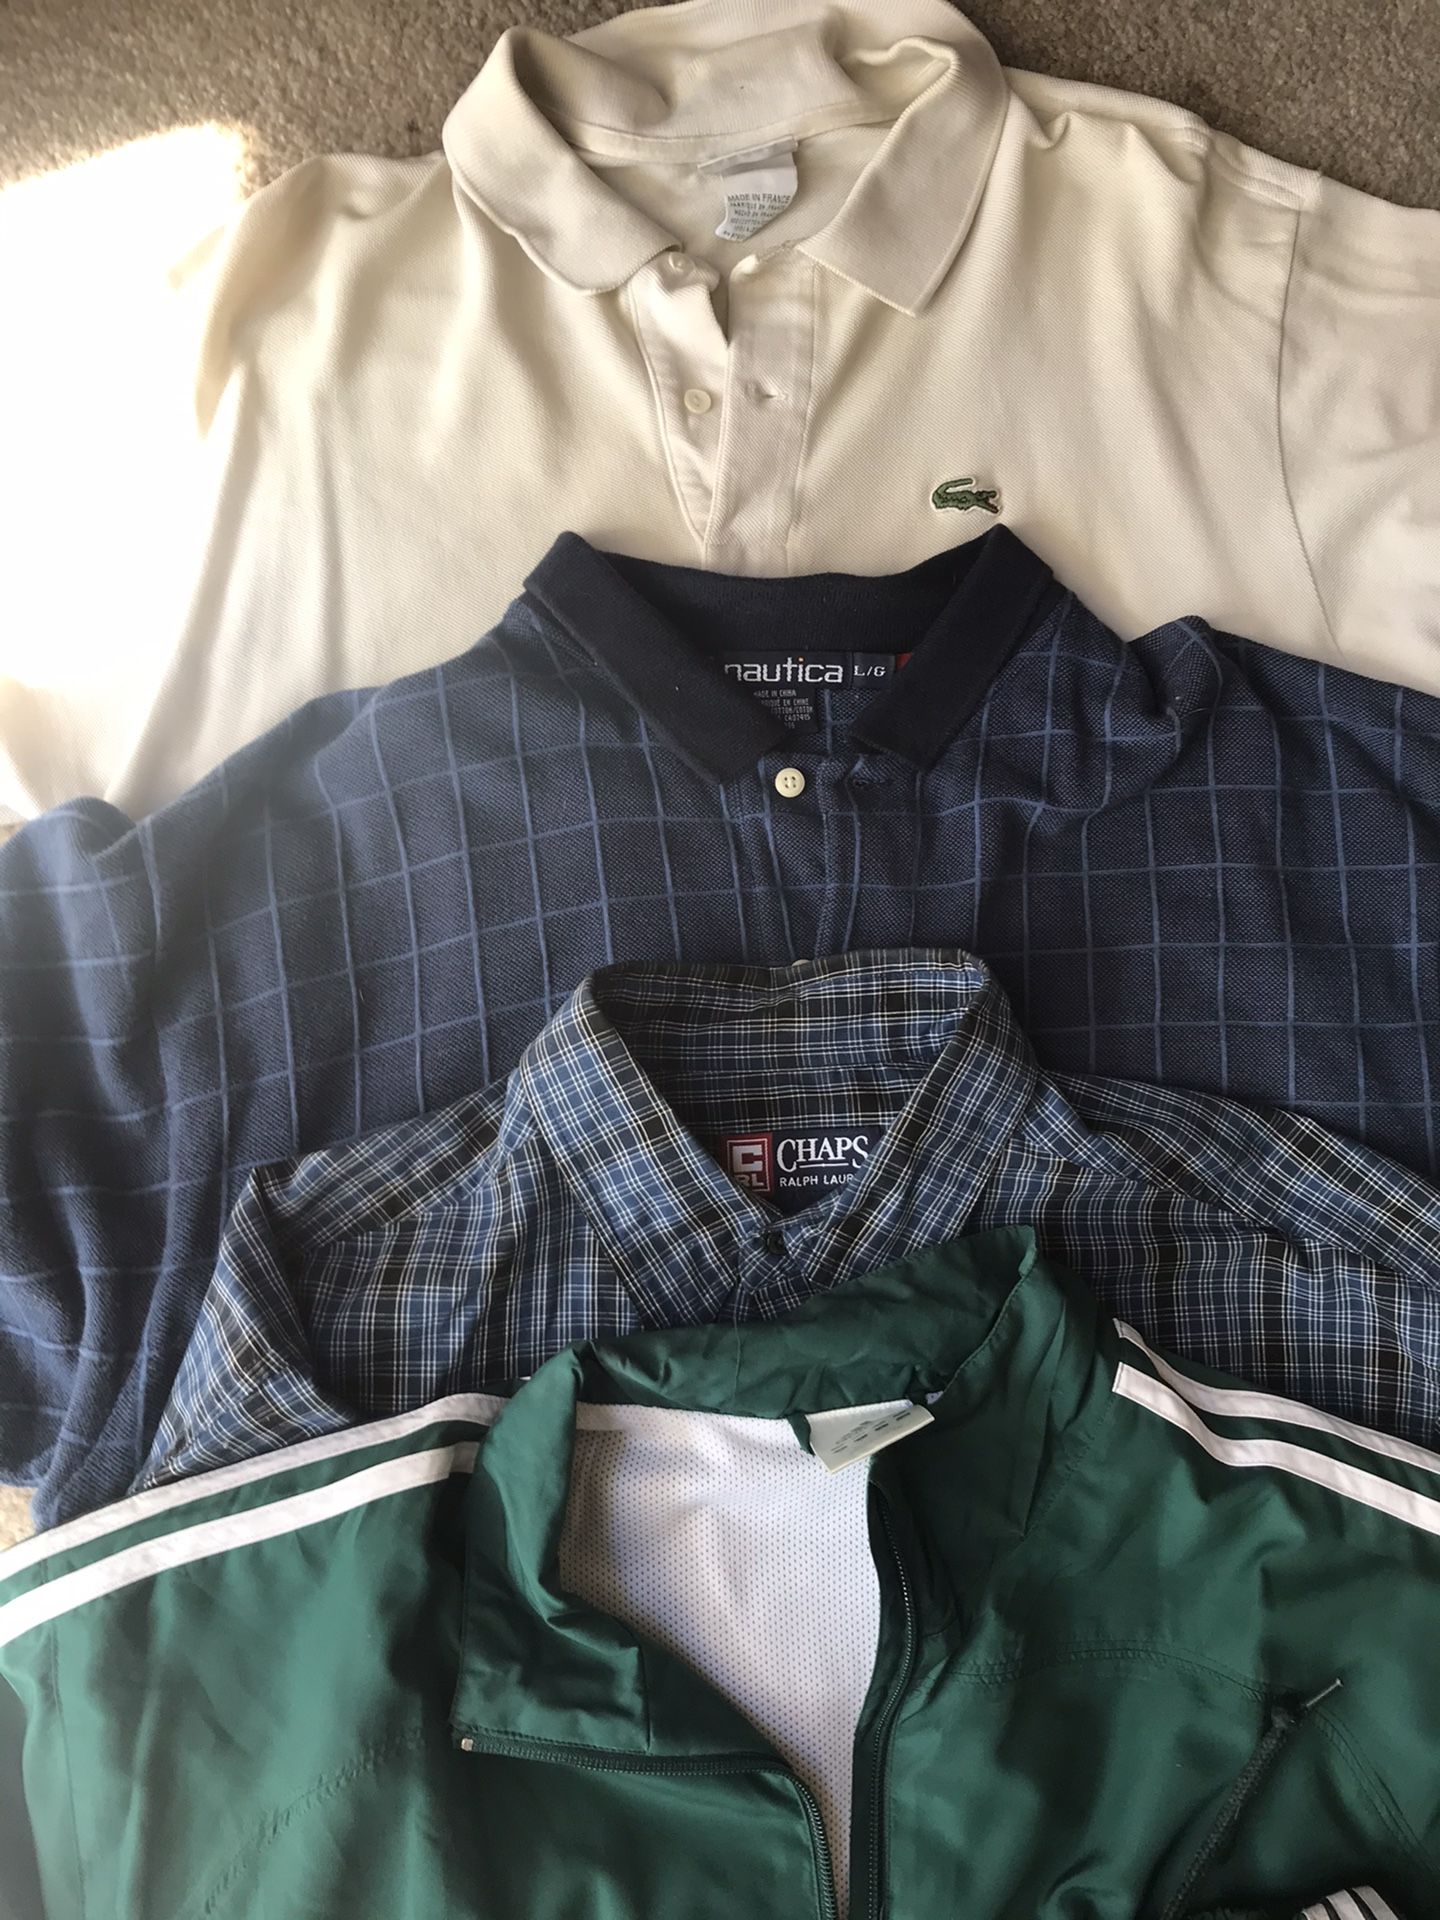 GENTLE USED NAME BRAND CLOTHES•$5 total